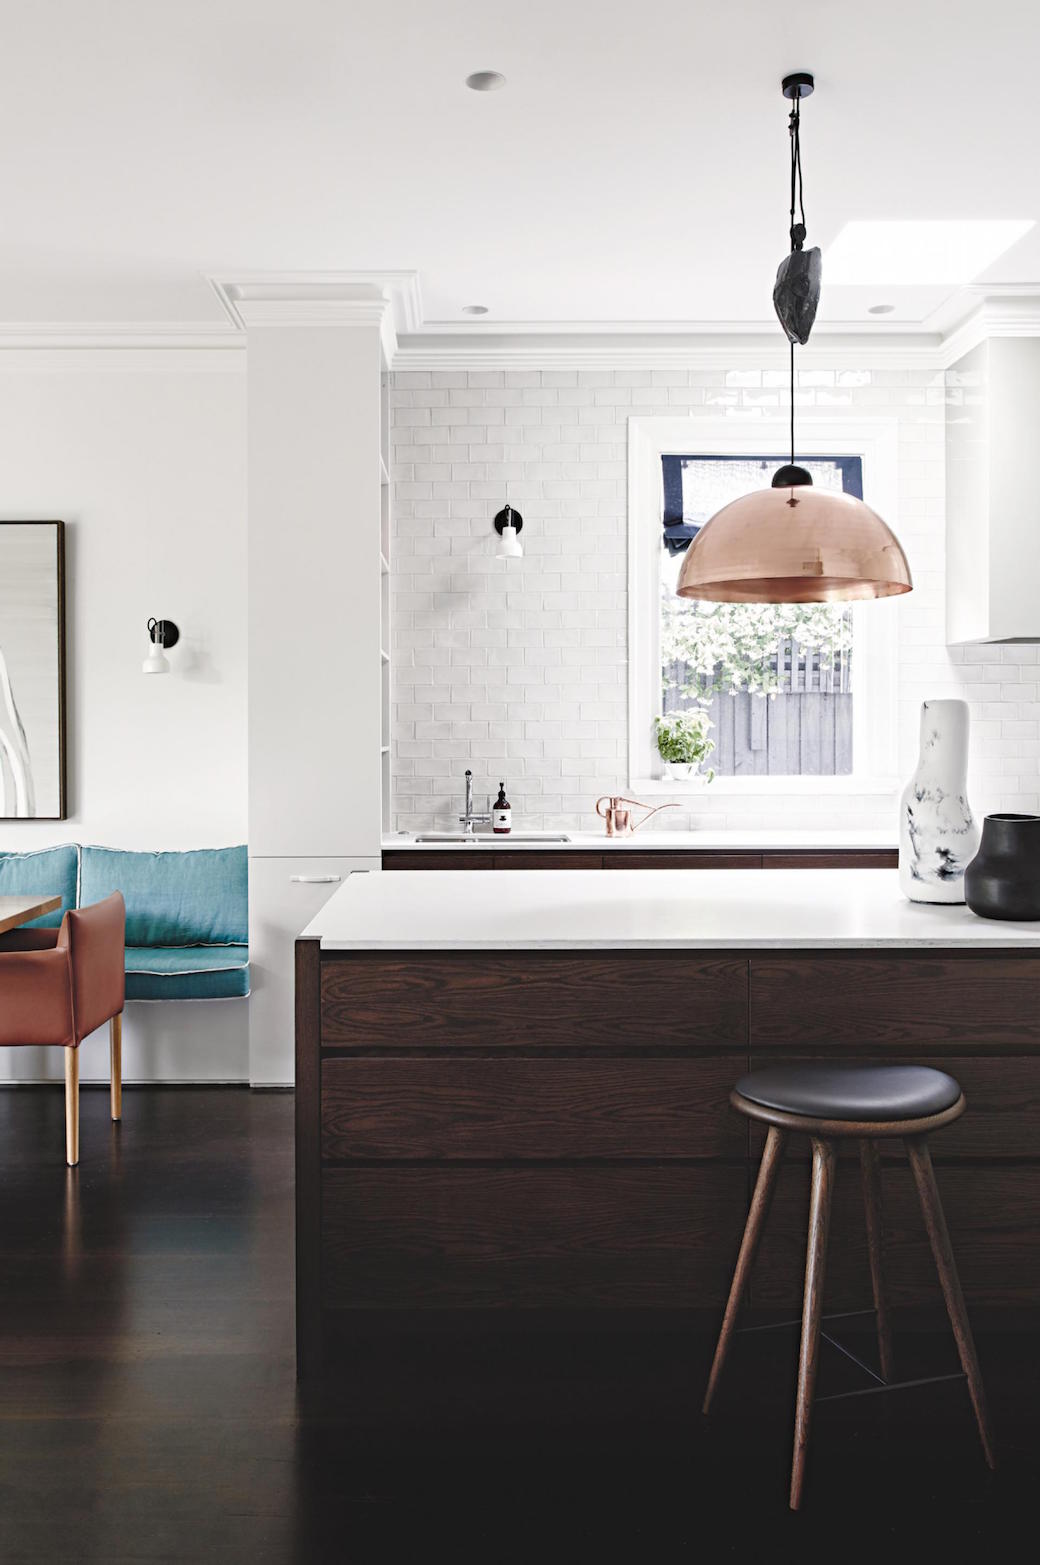 Melbourne renovation by Chelsea Hing, photo by Eve Wilson.